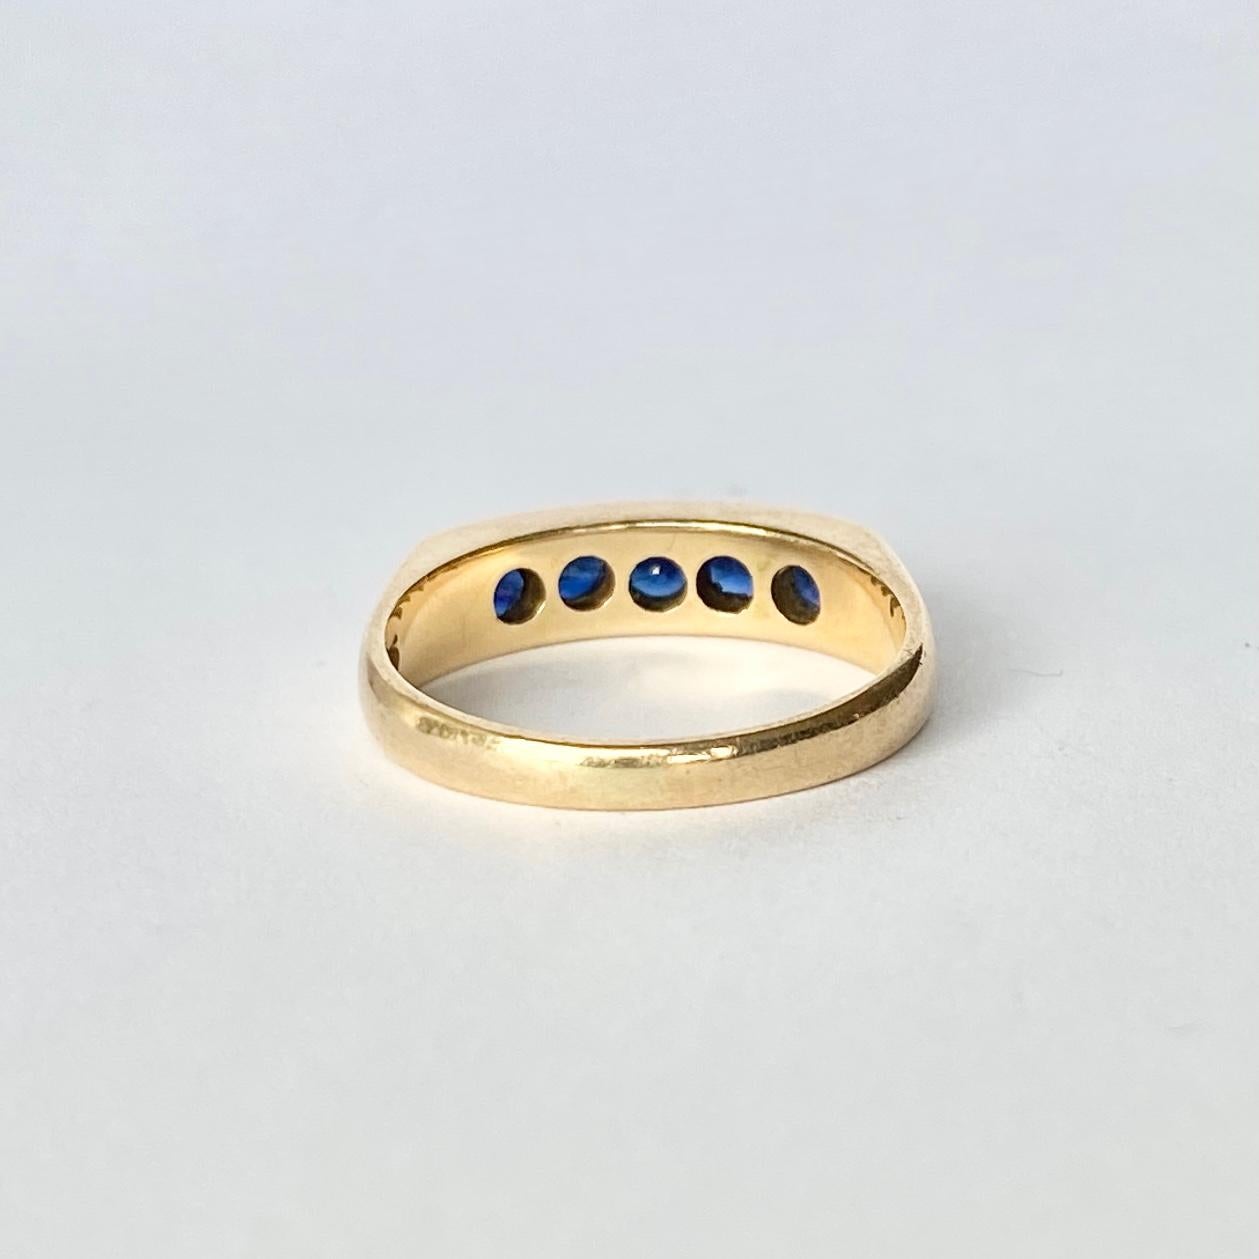 The sapphires in this ring are a deep blue colour and are set in an ornate square detailed gallery all modelled in 14ct gold. The stones total 50pts. 

Ring Size: L 1/2 or 6 
Band Width: 5mm
Height Off Finger: 3mm

Weight: 3.3g